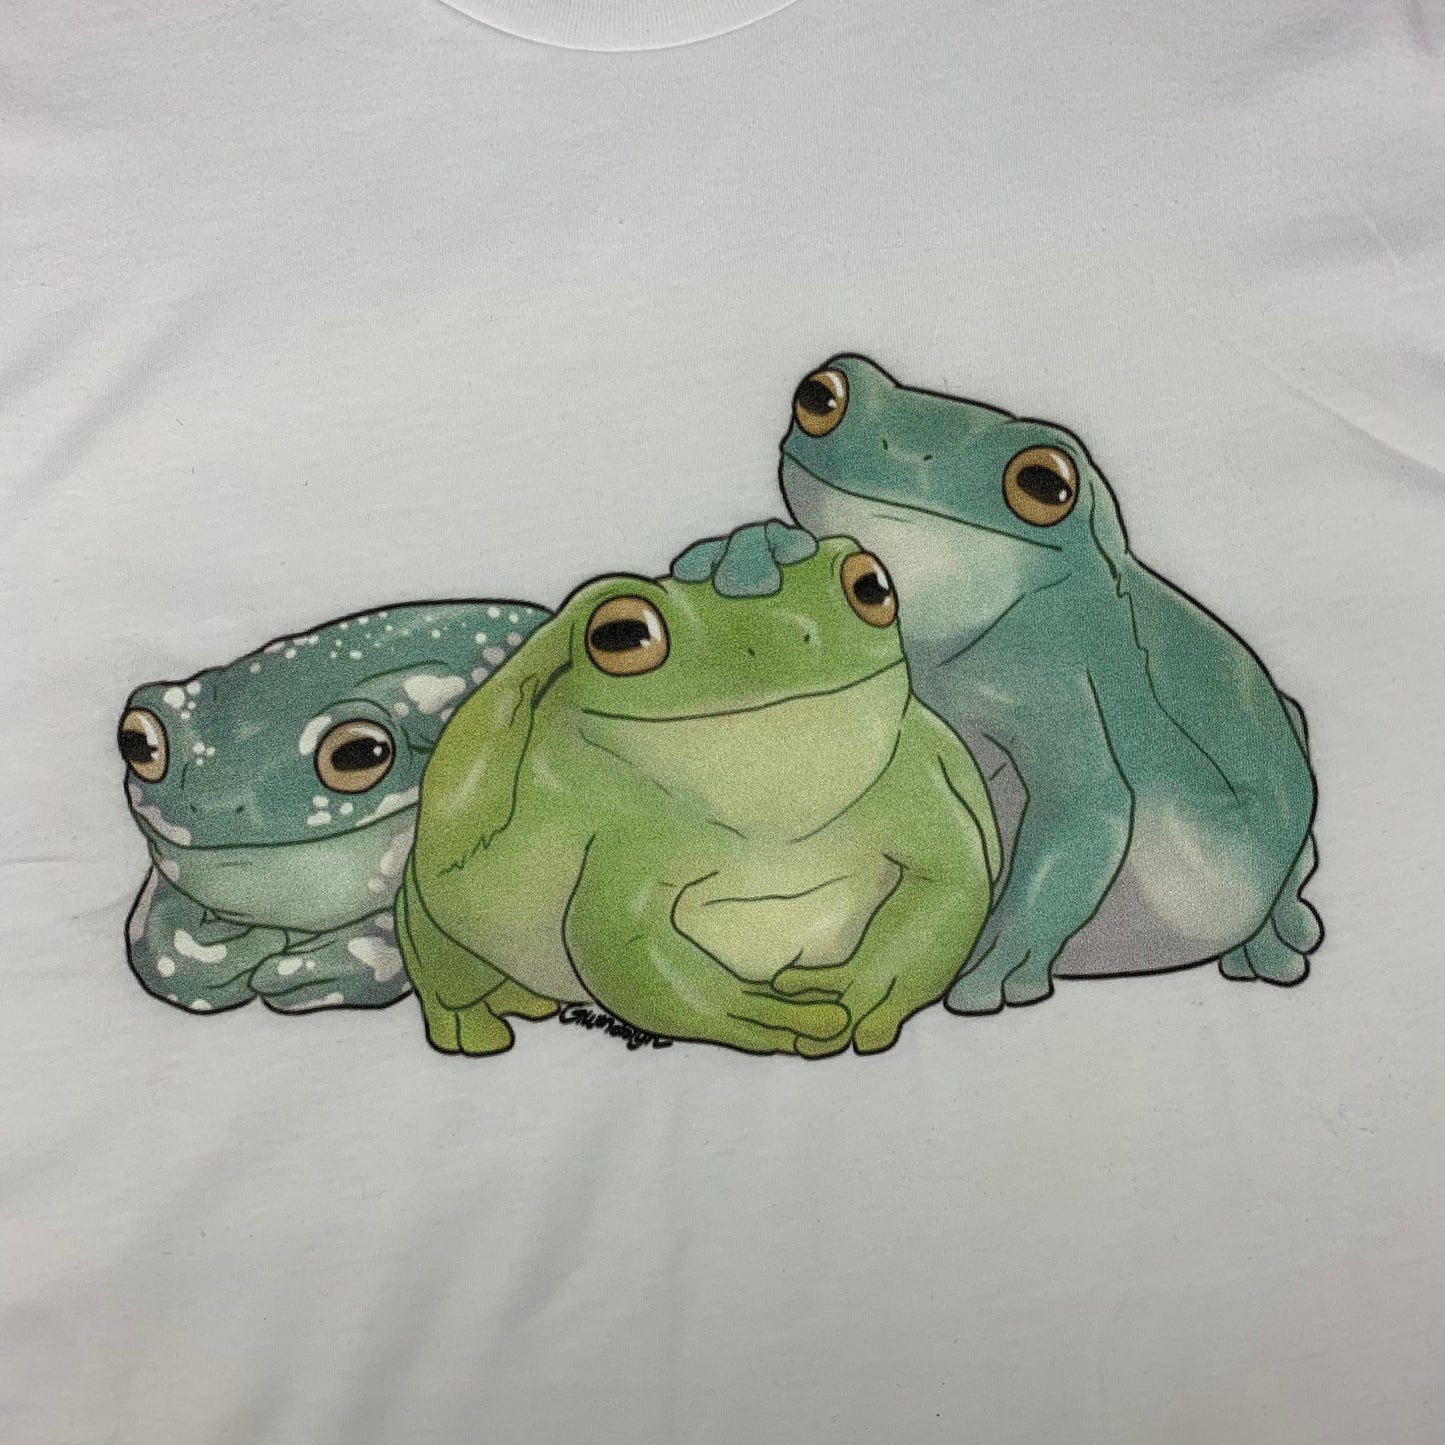 Tree Frogs Trio, White's Tree Frogs T-Shirt youth